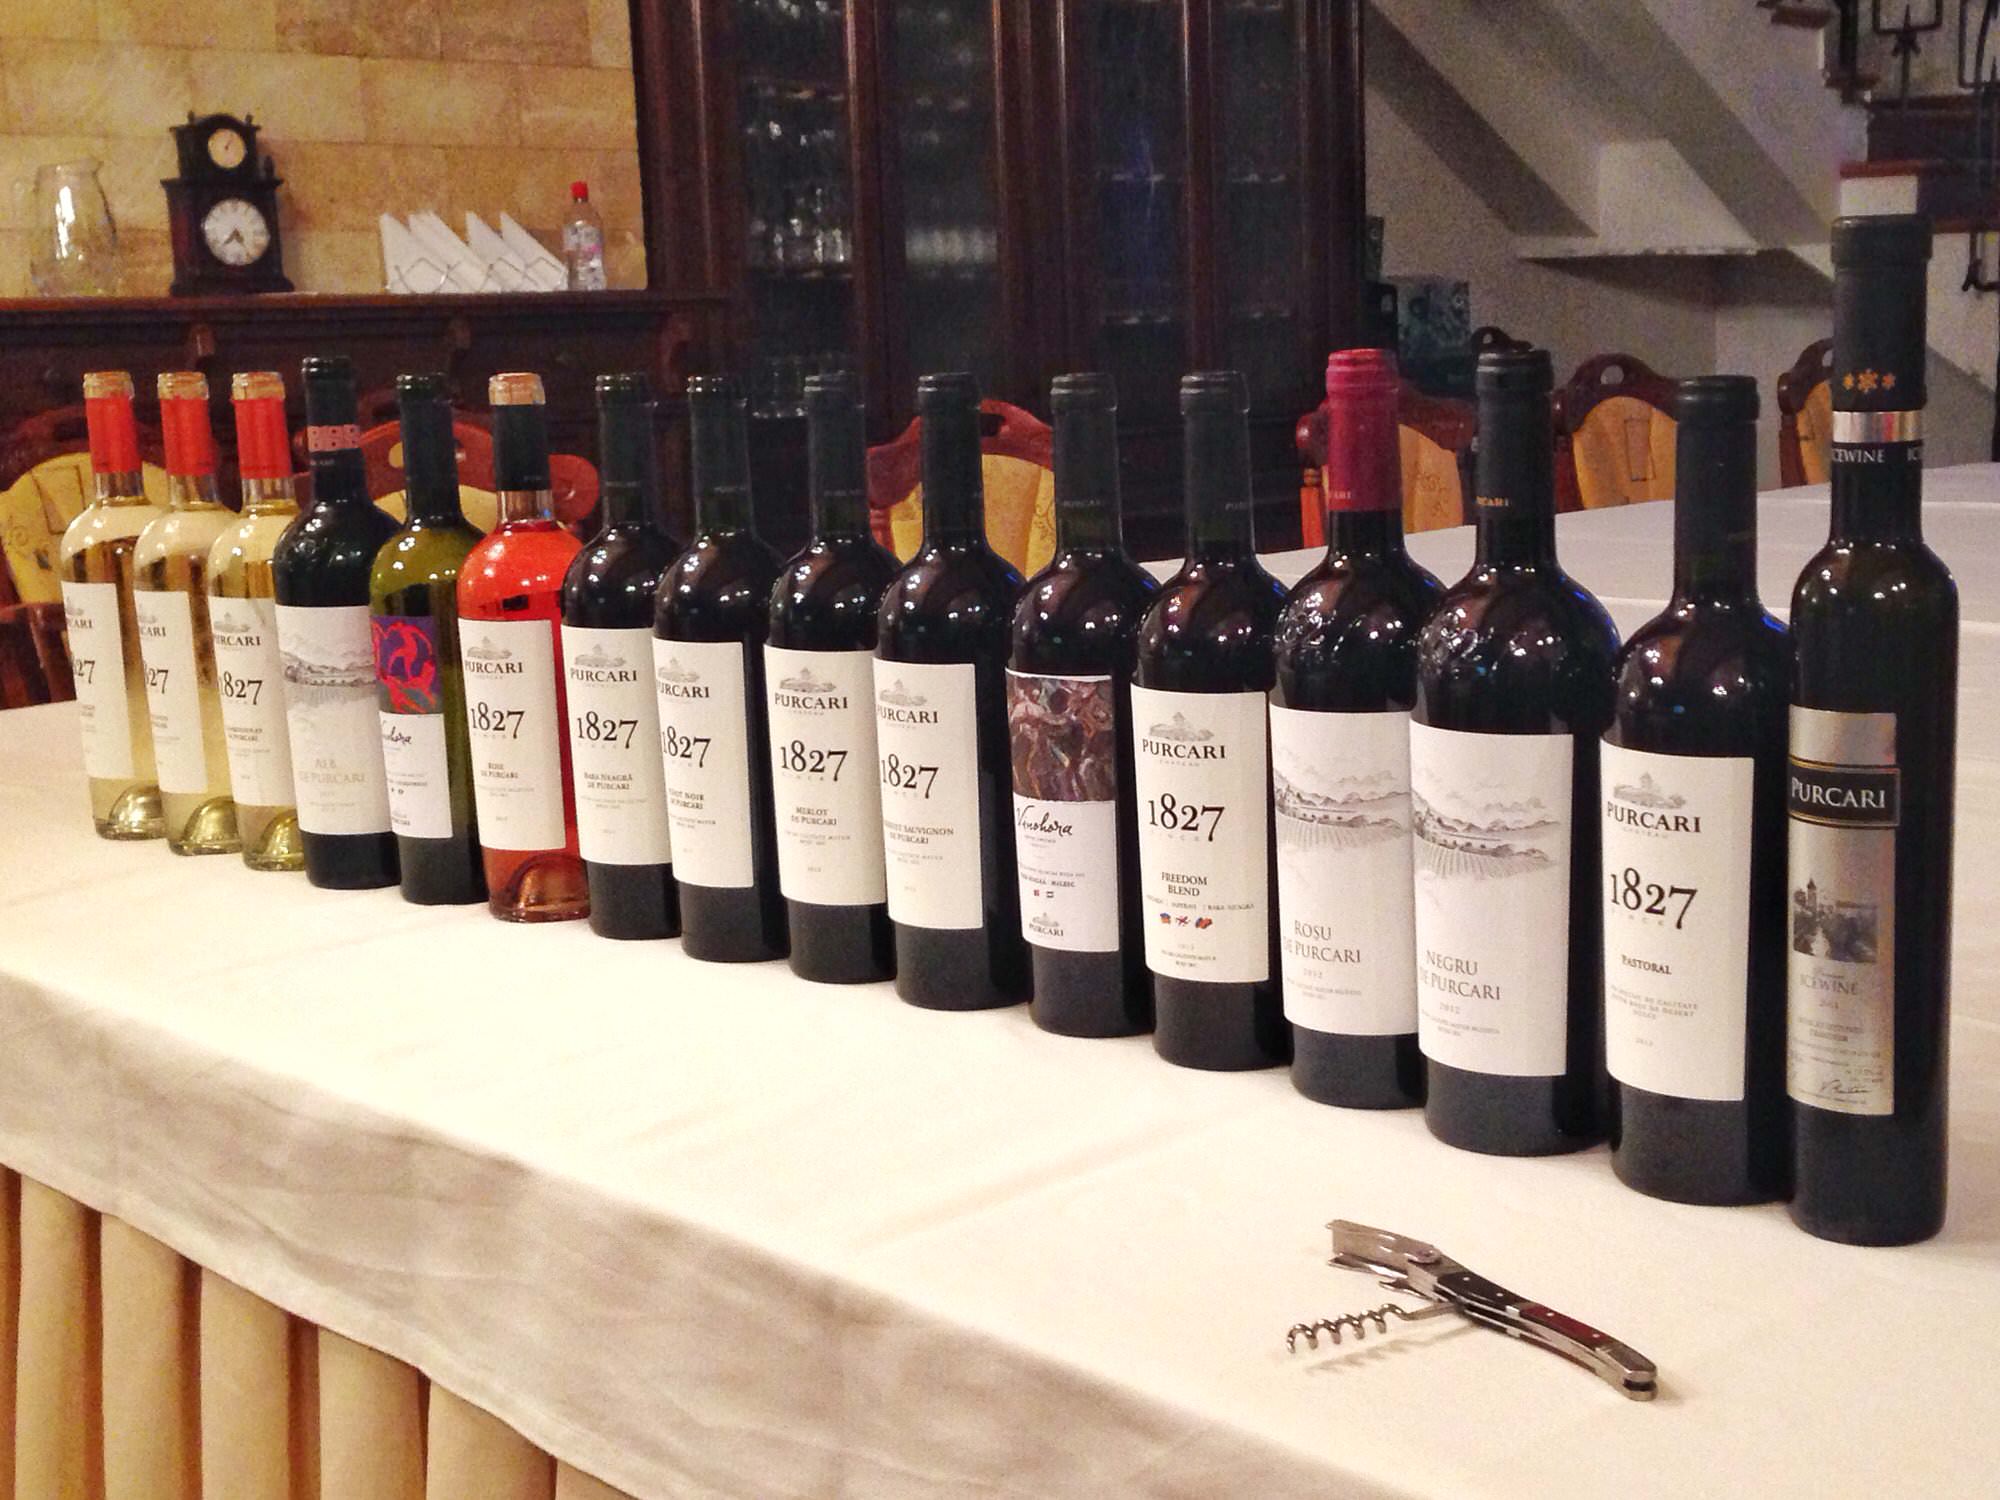 There are a lot of wines to taste -- Purcari has 16 on offer!